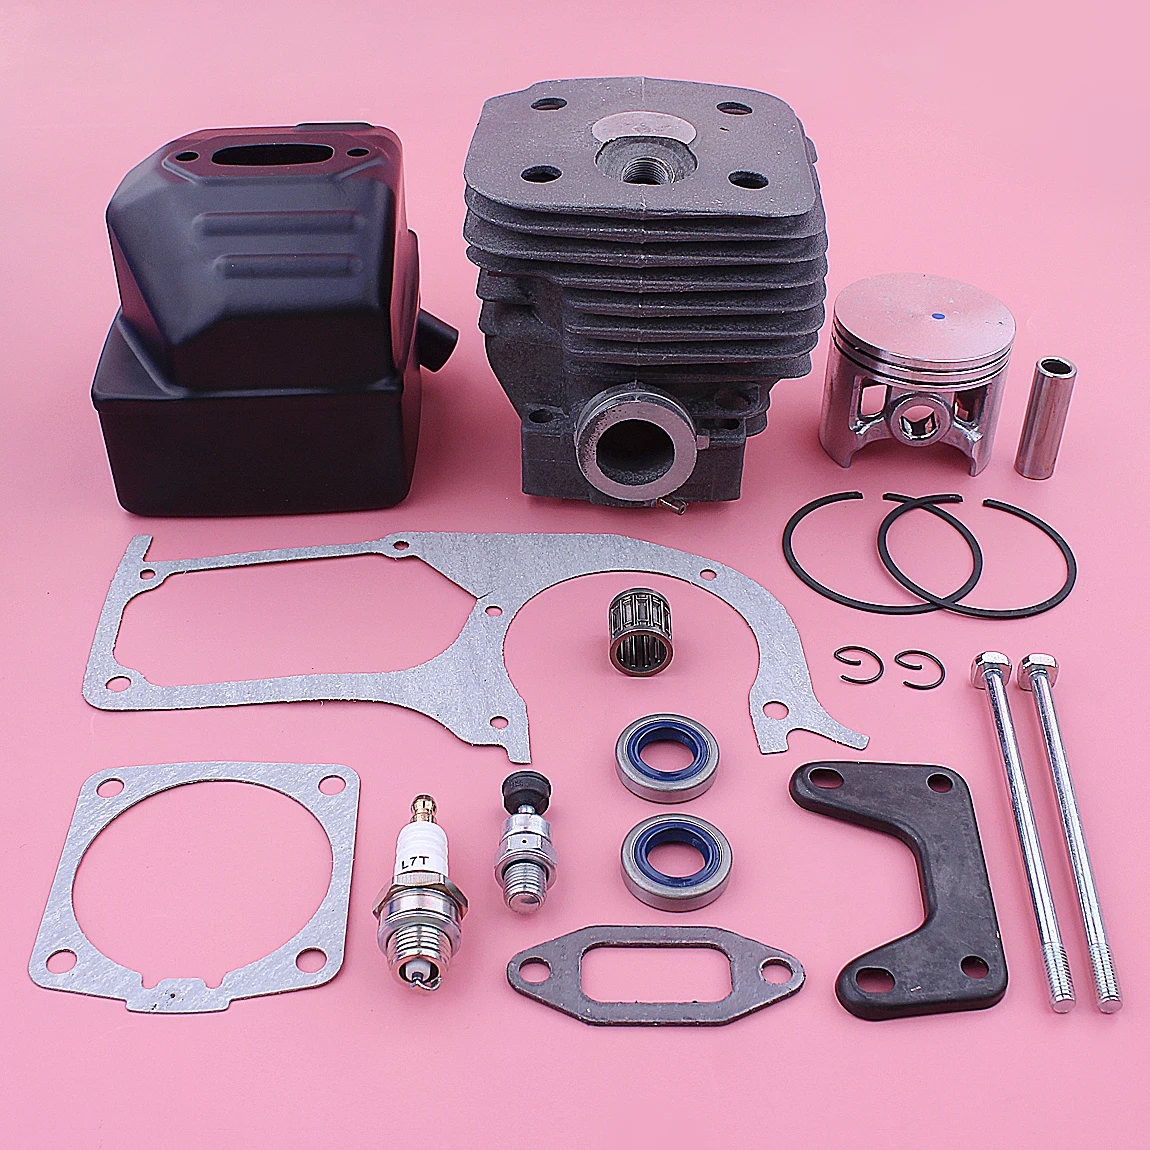 58mm Engine Motor Cylinder Piston Ported Muffler Kit For Husqvarna 395 395XP Gasket Oil Seal Chainsaw Garden Tool Parts